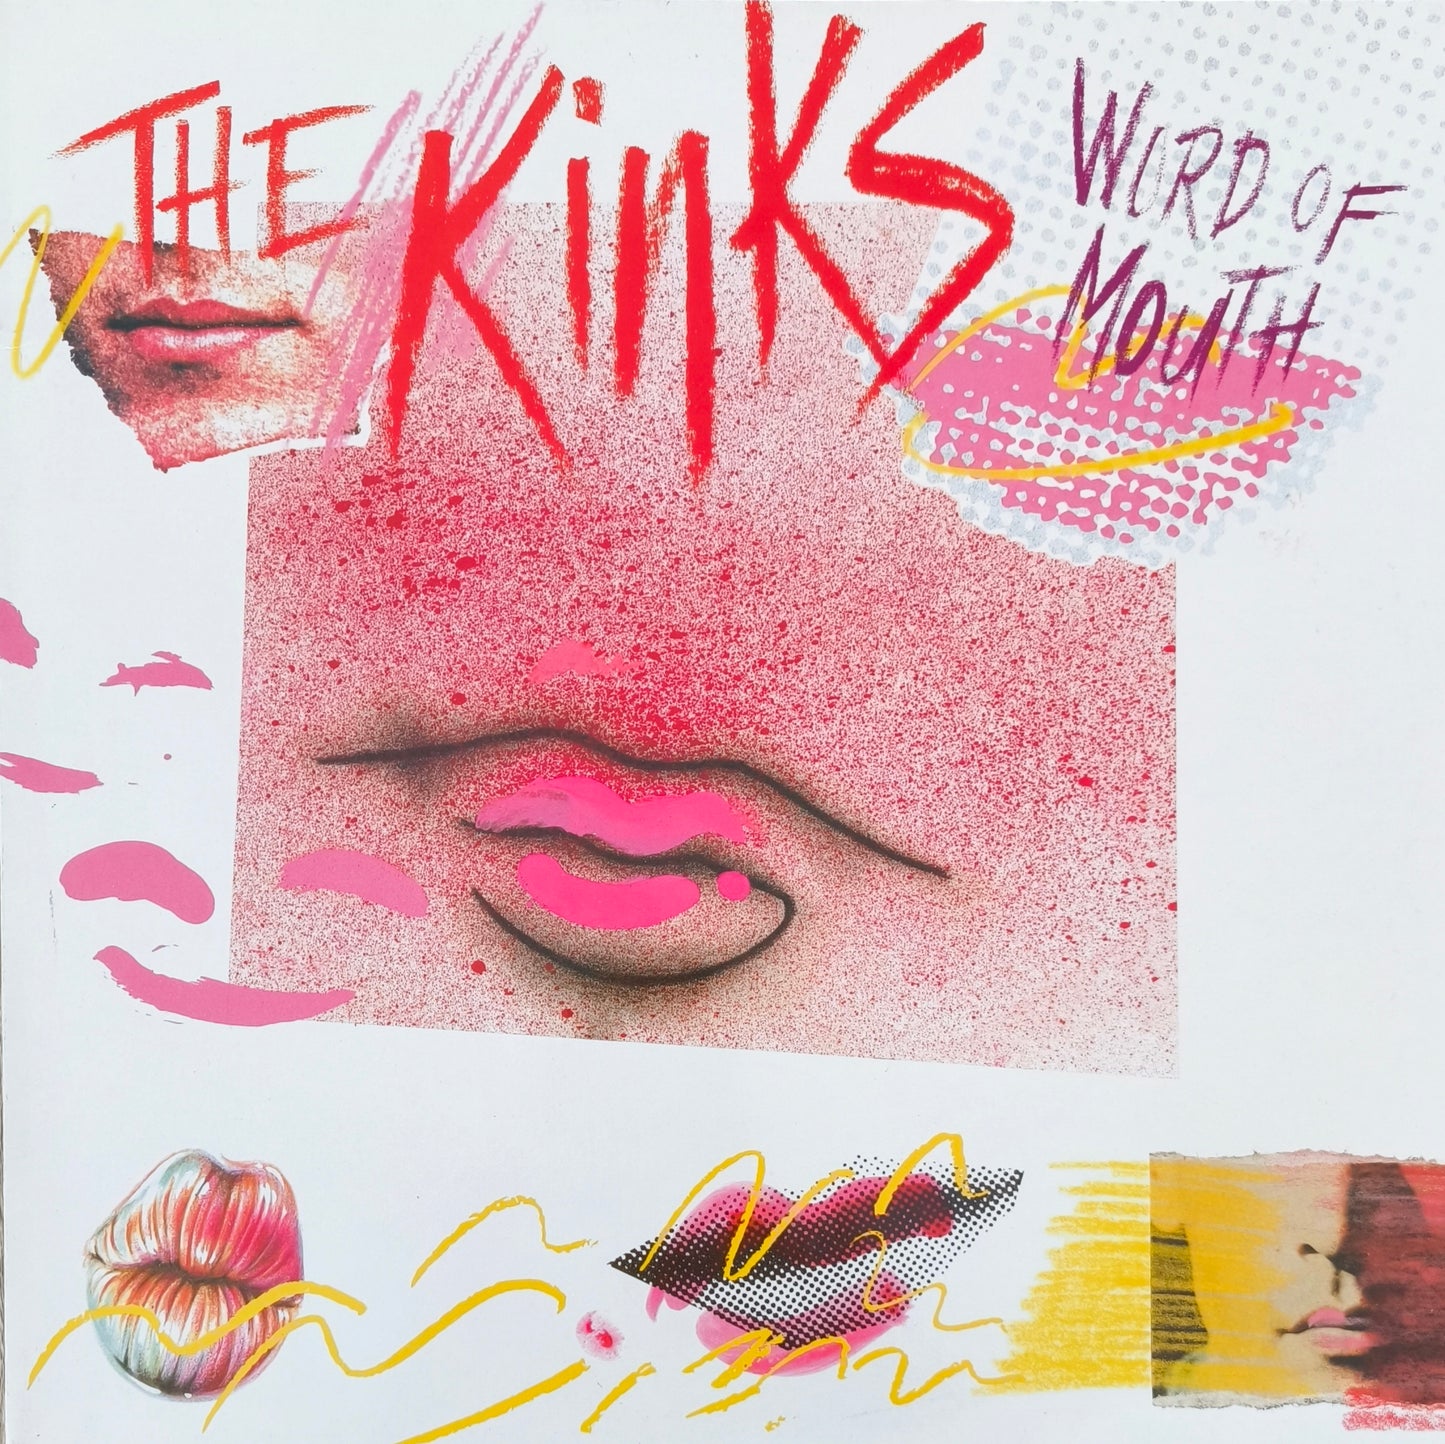 THE KINKS - Word Of Mouth